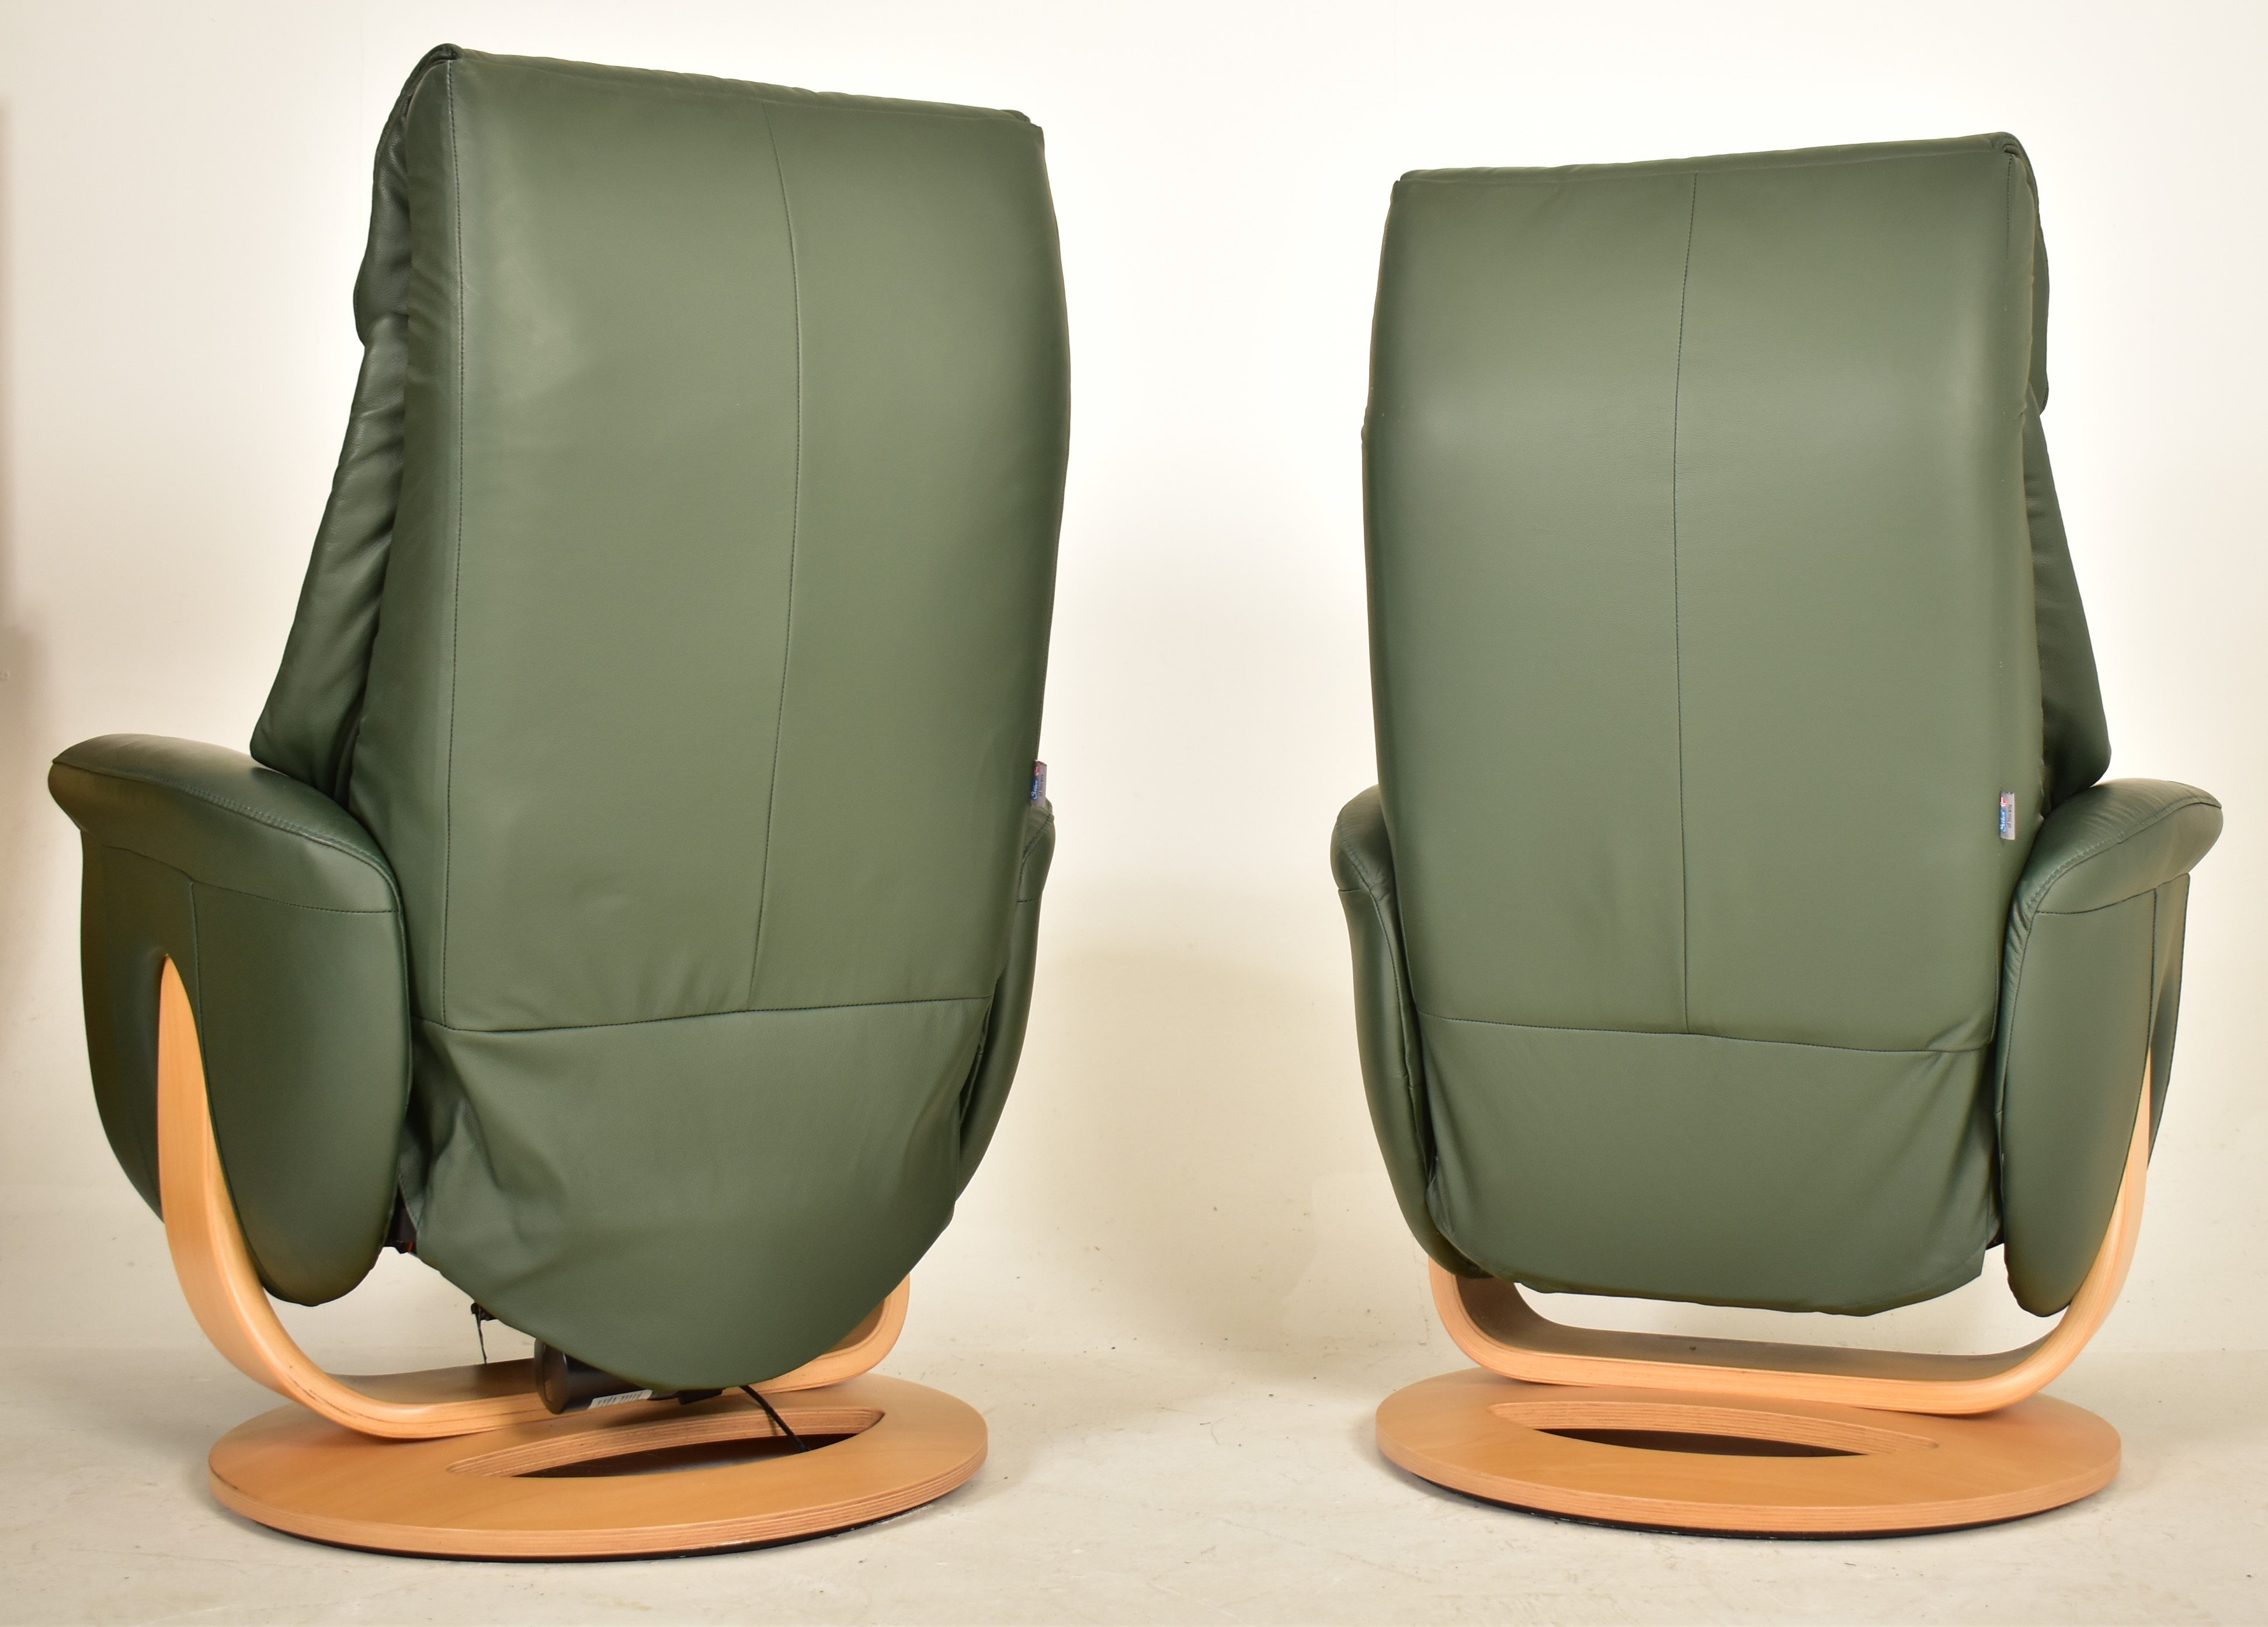 SITBEST - PAIR OF CONTEMPORARY SWIVEL RECLINING ARMCHAIRS - Image 5 of 7